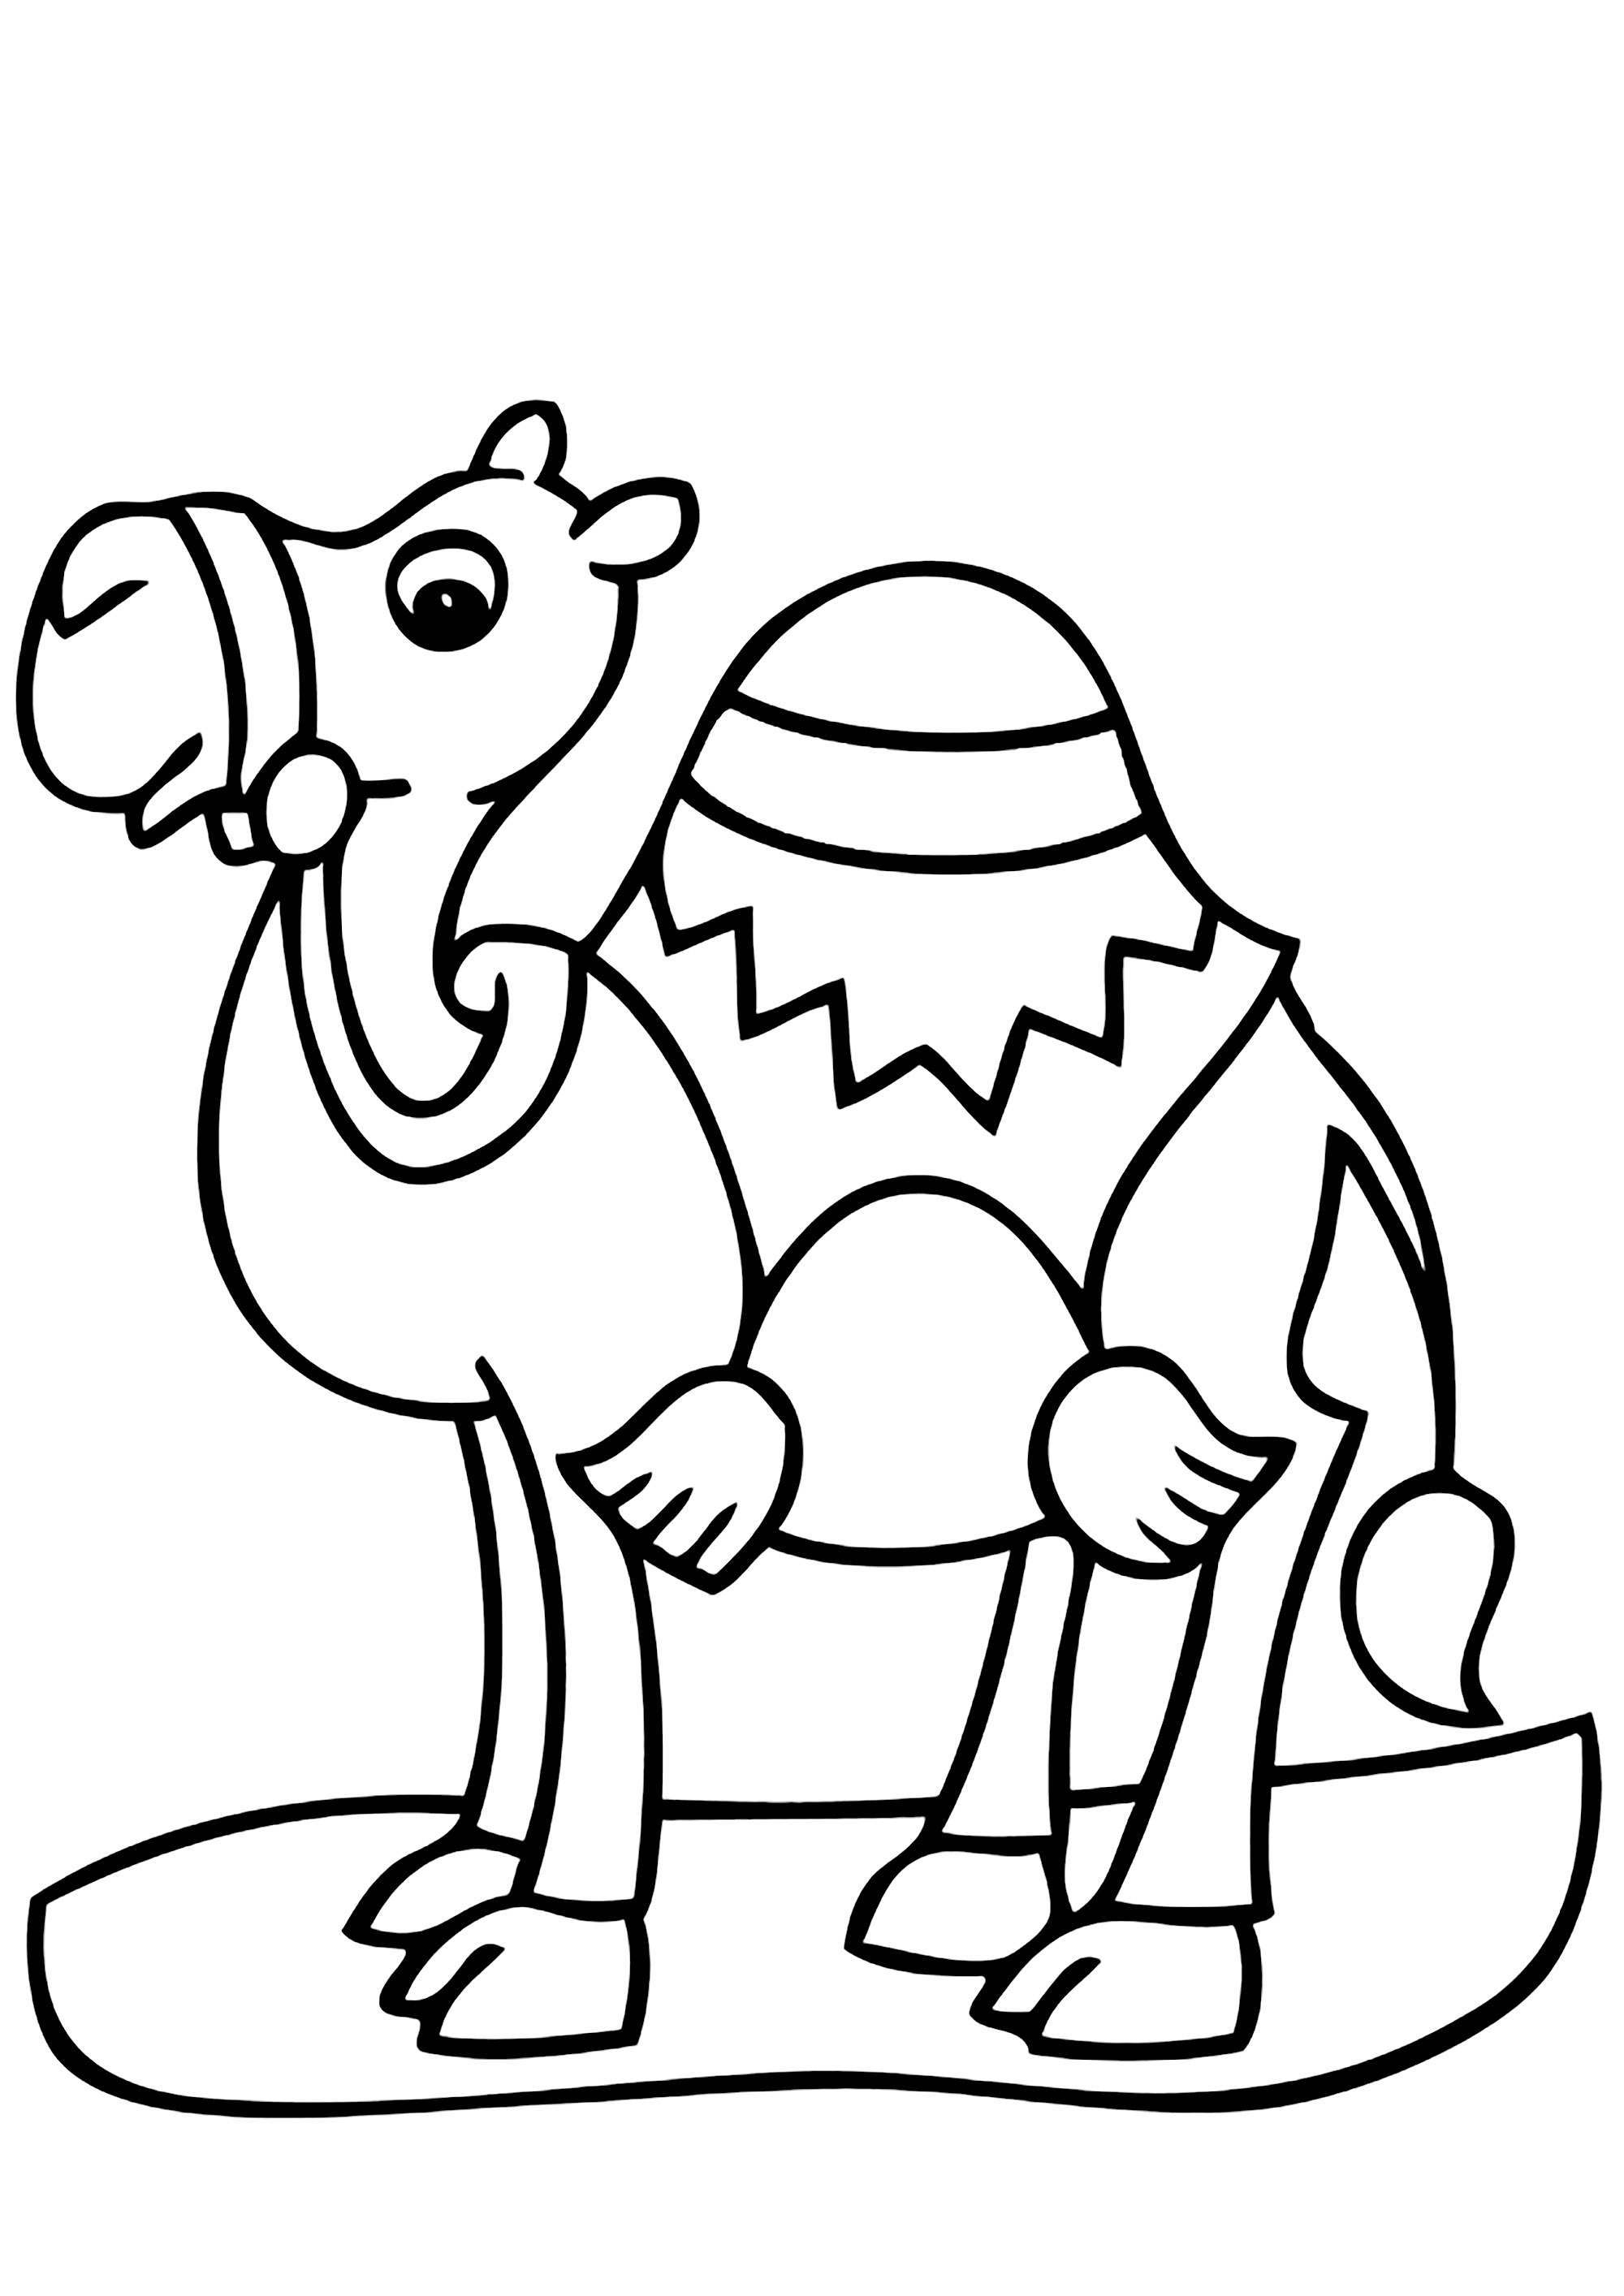 Simple dromedary coloring. Thick lines, easy and pleasant to color